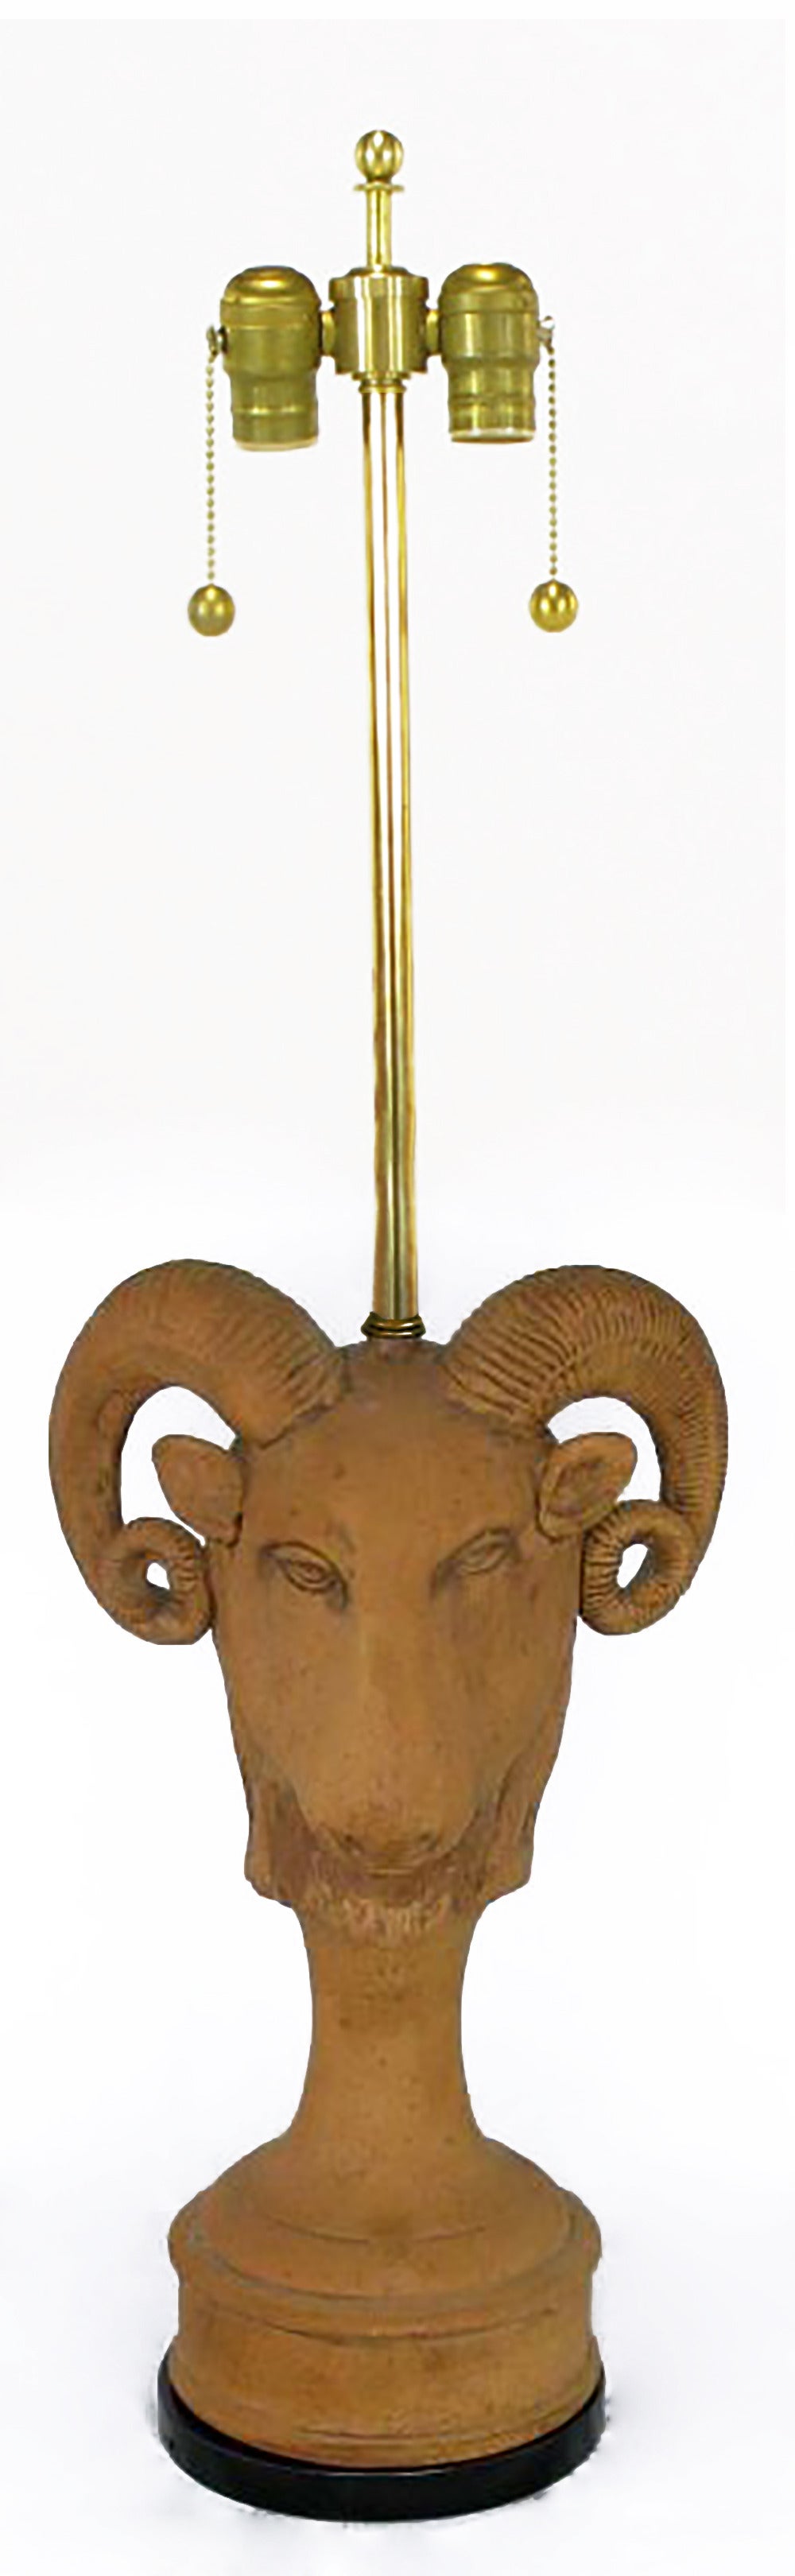 Terracotta table lamps in the form of a full ram's head descending into a pillar and circular base with a black lacquered plinth. Brass stems and double socket clusters, rewired. Label inside states 